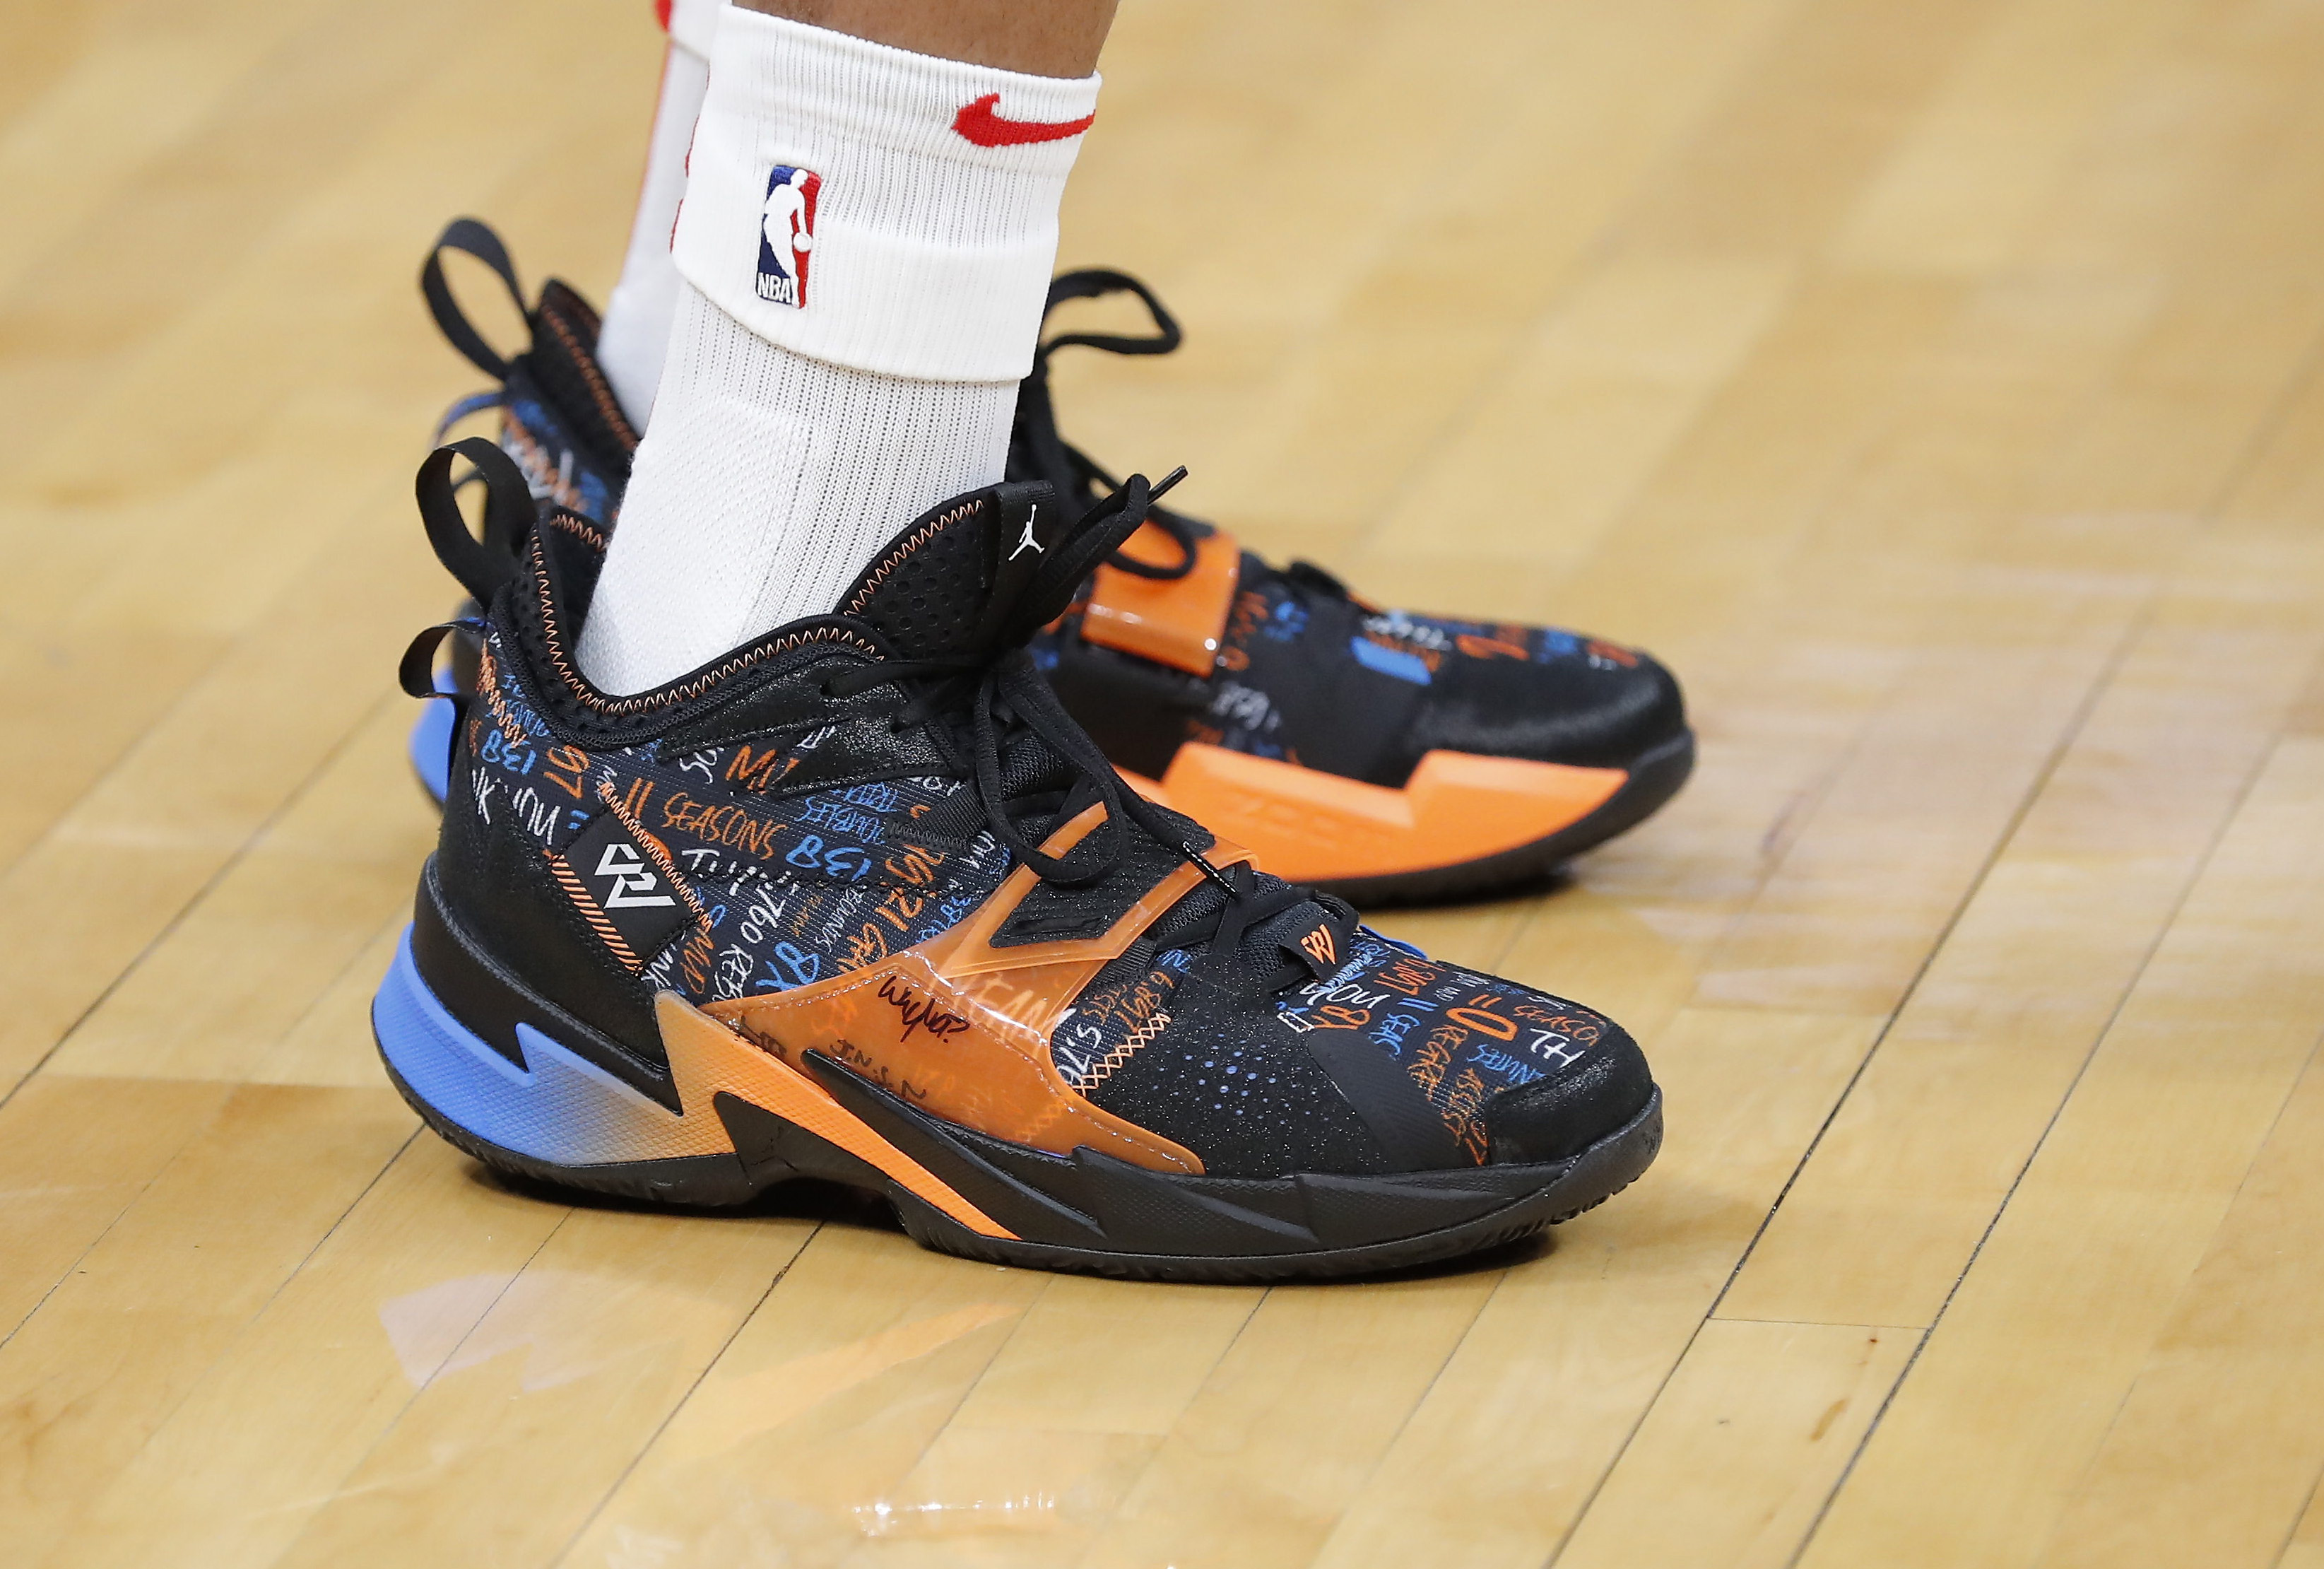 OKC Thunder: A new Westbrook Why Not Zer0.2 specifically for kids